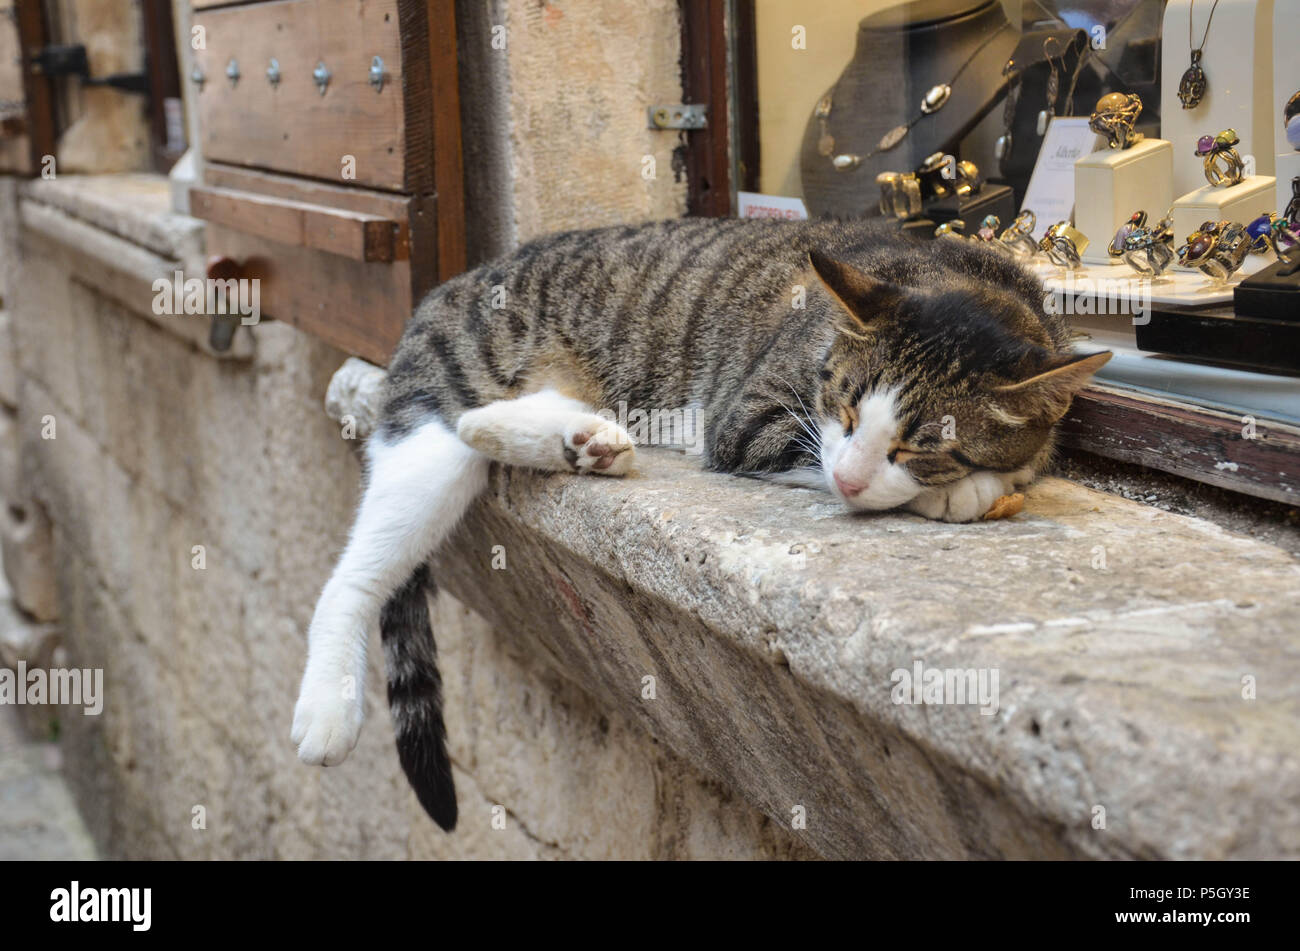 A cat leaning and resting on a shop window sill, Old Town, Kotor, Bay of Kotor, Montenegro Stock Photo